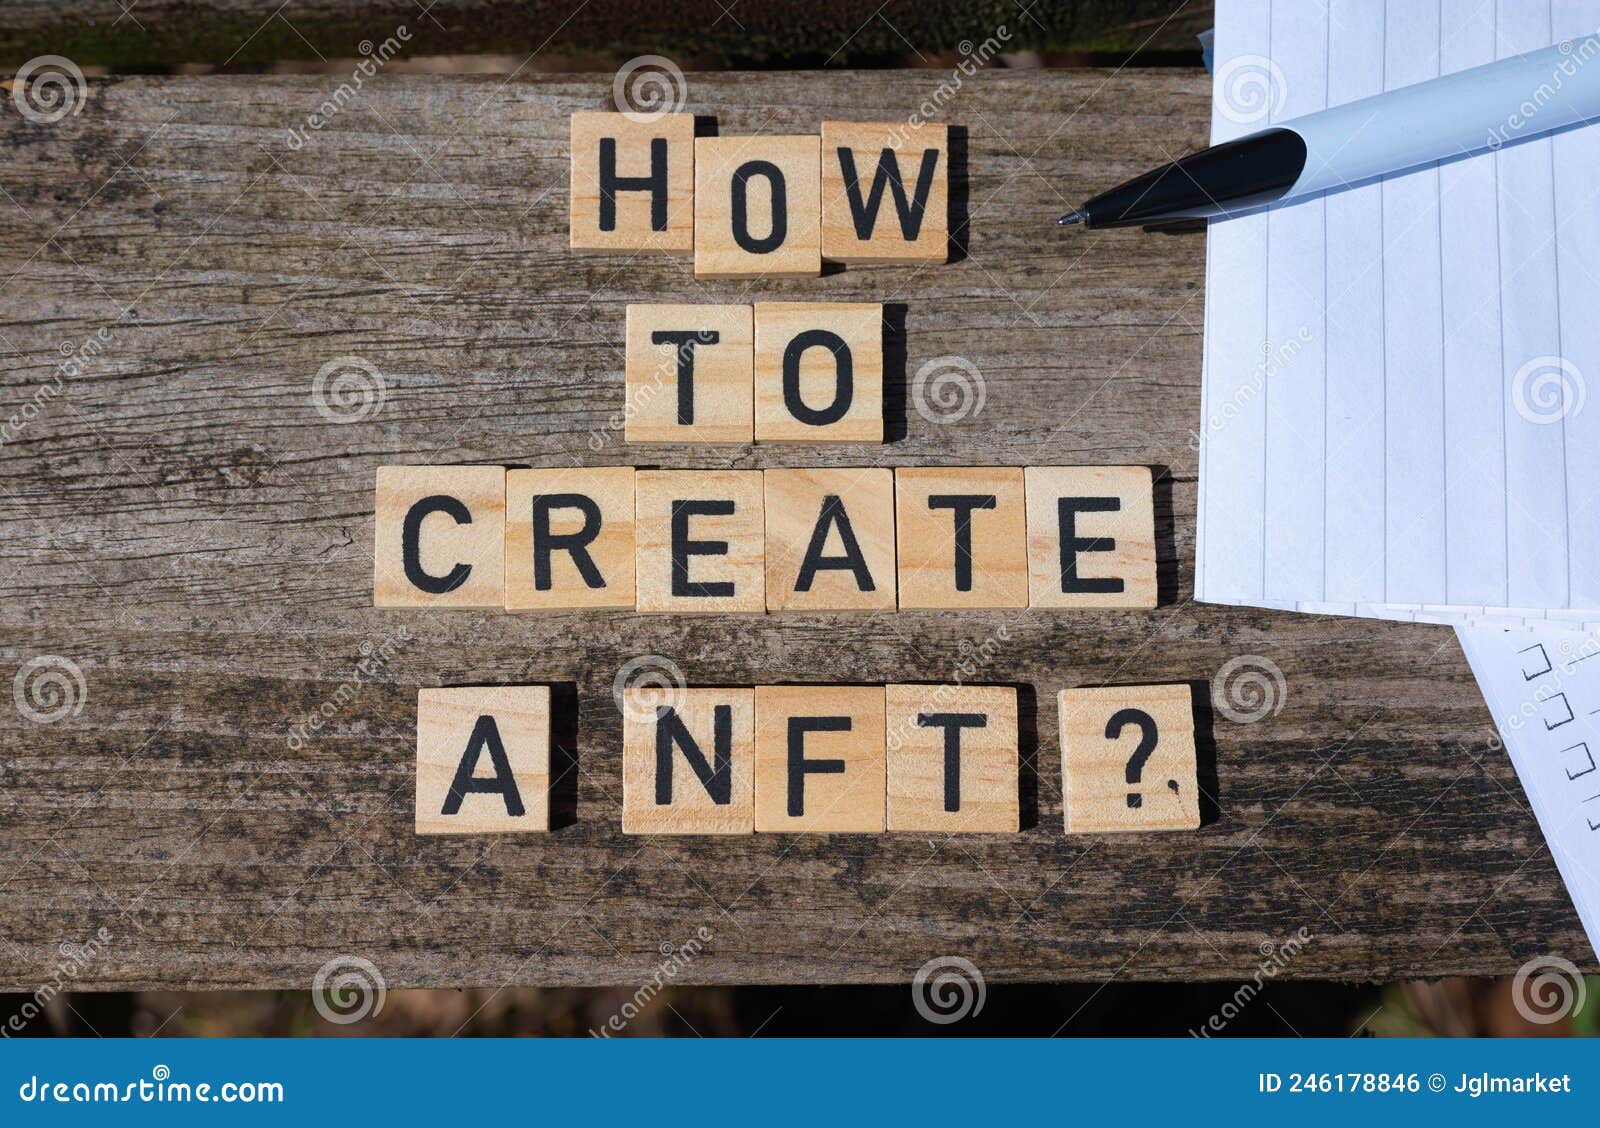 how to create a nft? black capital letter words on wooden toy blocks on a natural garden table background with paper and pencil.